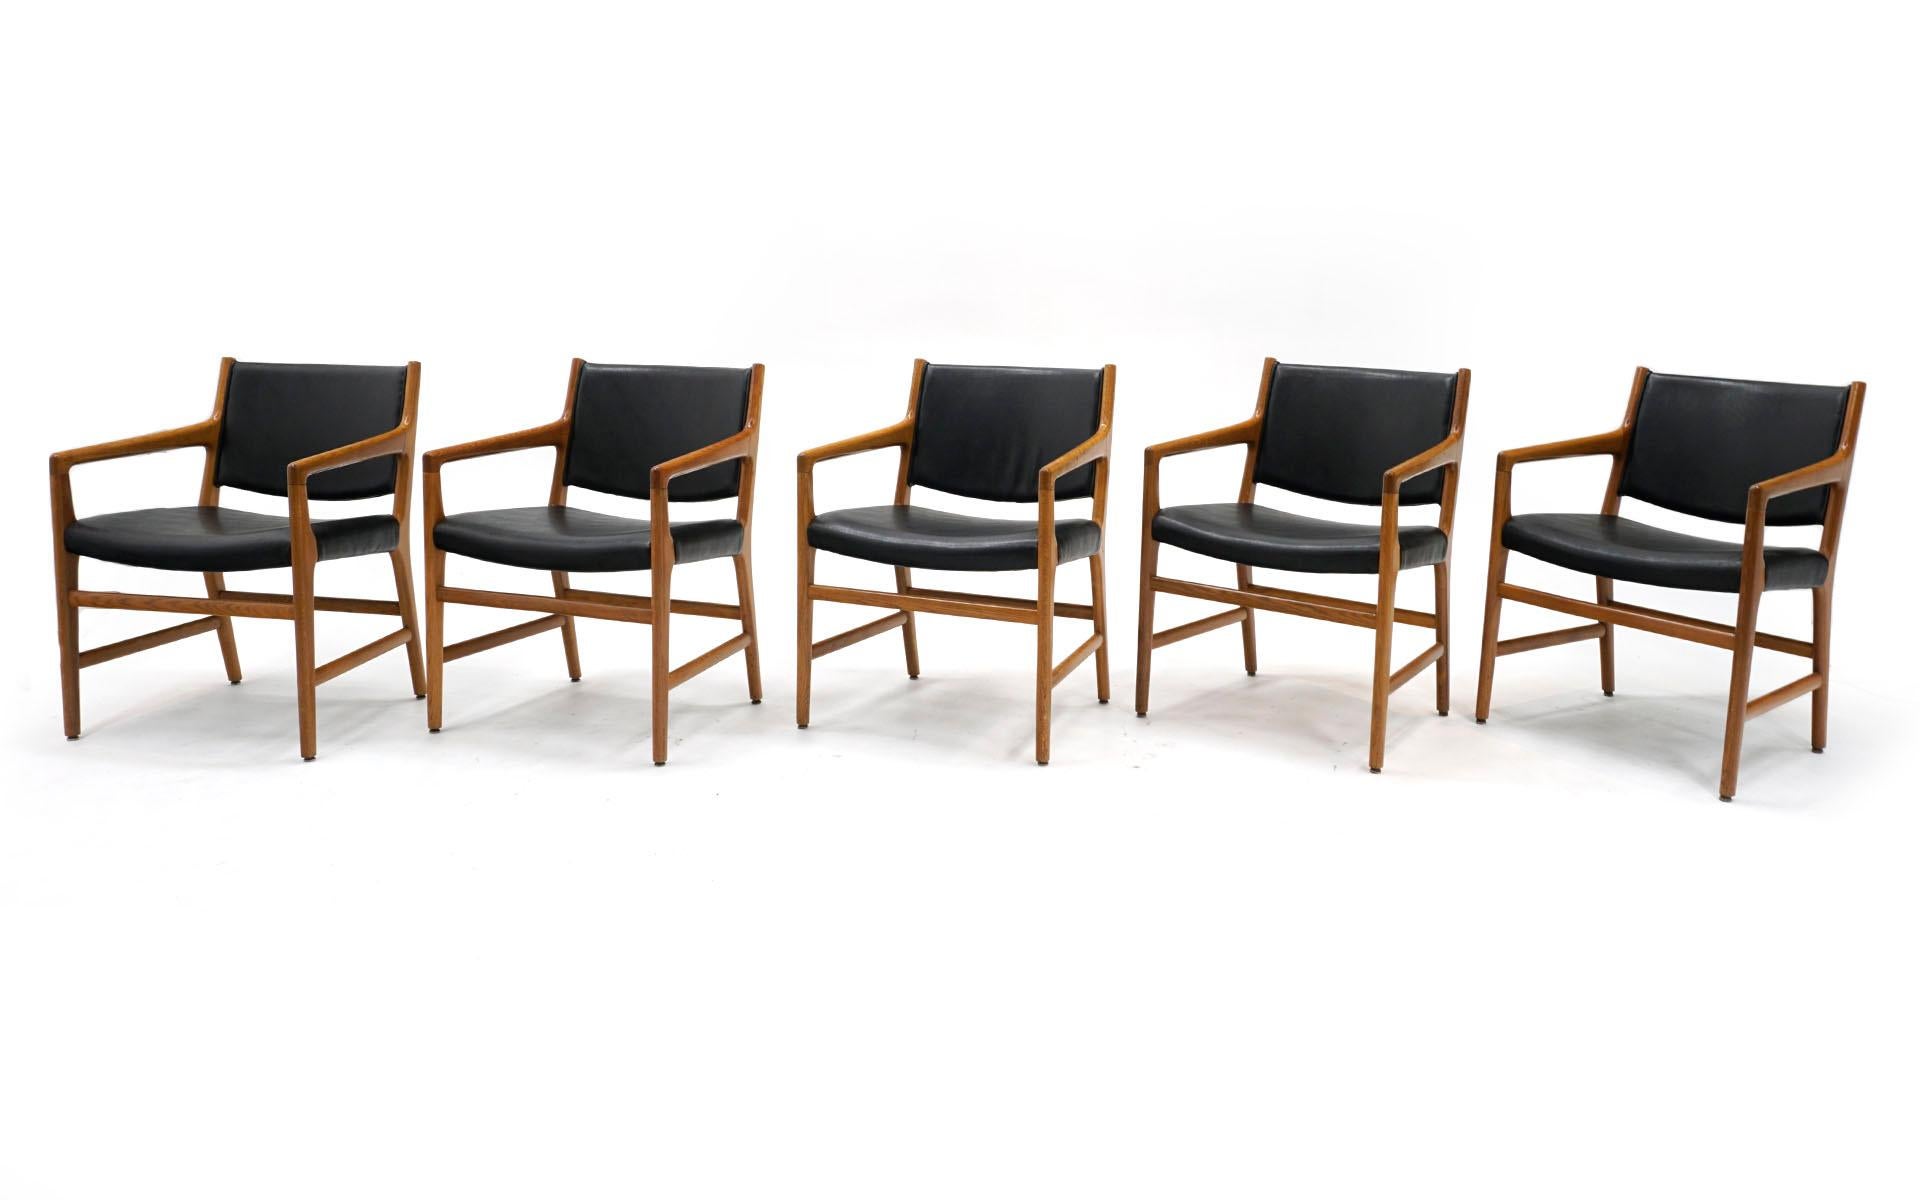 Set of 10 Hans Wegner dining chairs, all armchairs, in oak and black leather for Johannes Hansen, Model JH507. This set of Hans Wegner chairs came directly from the Francis A. Countway Library of Medicine at the Harvard Medical School. This building